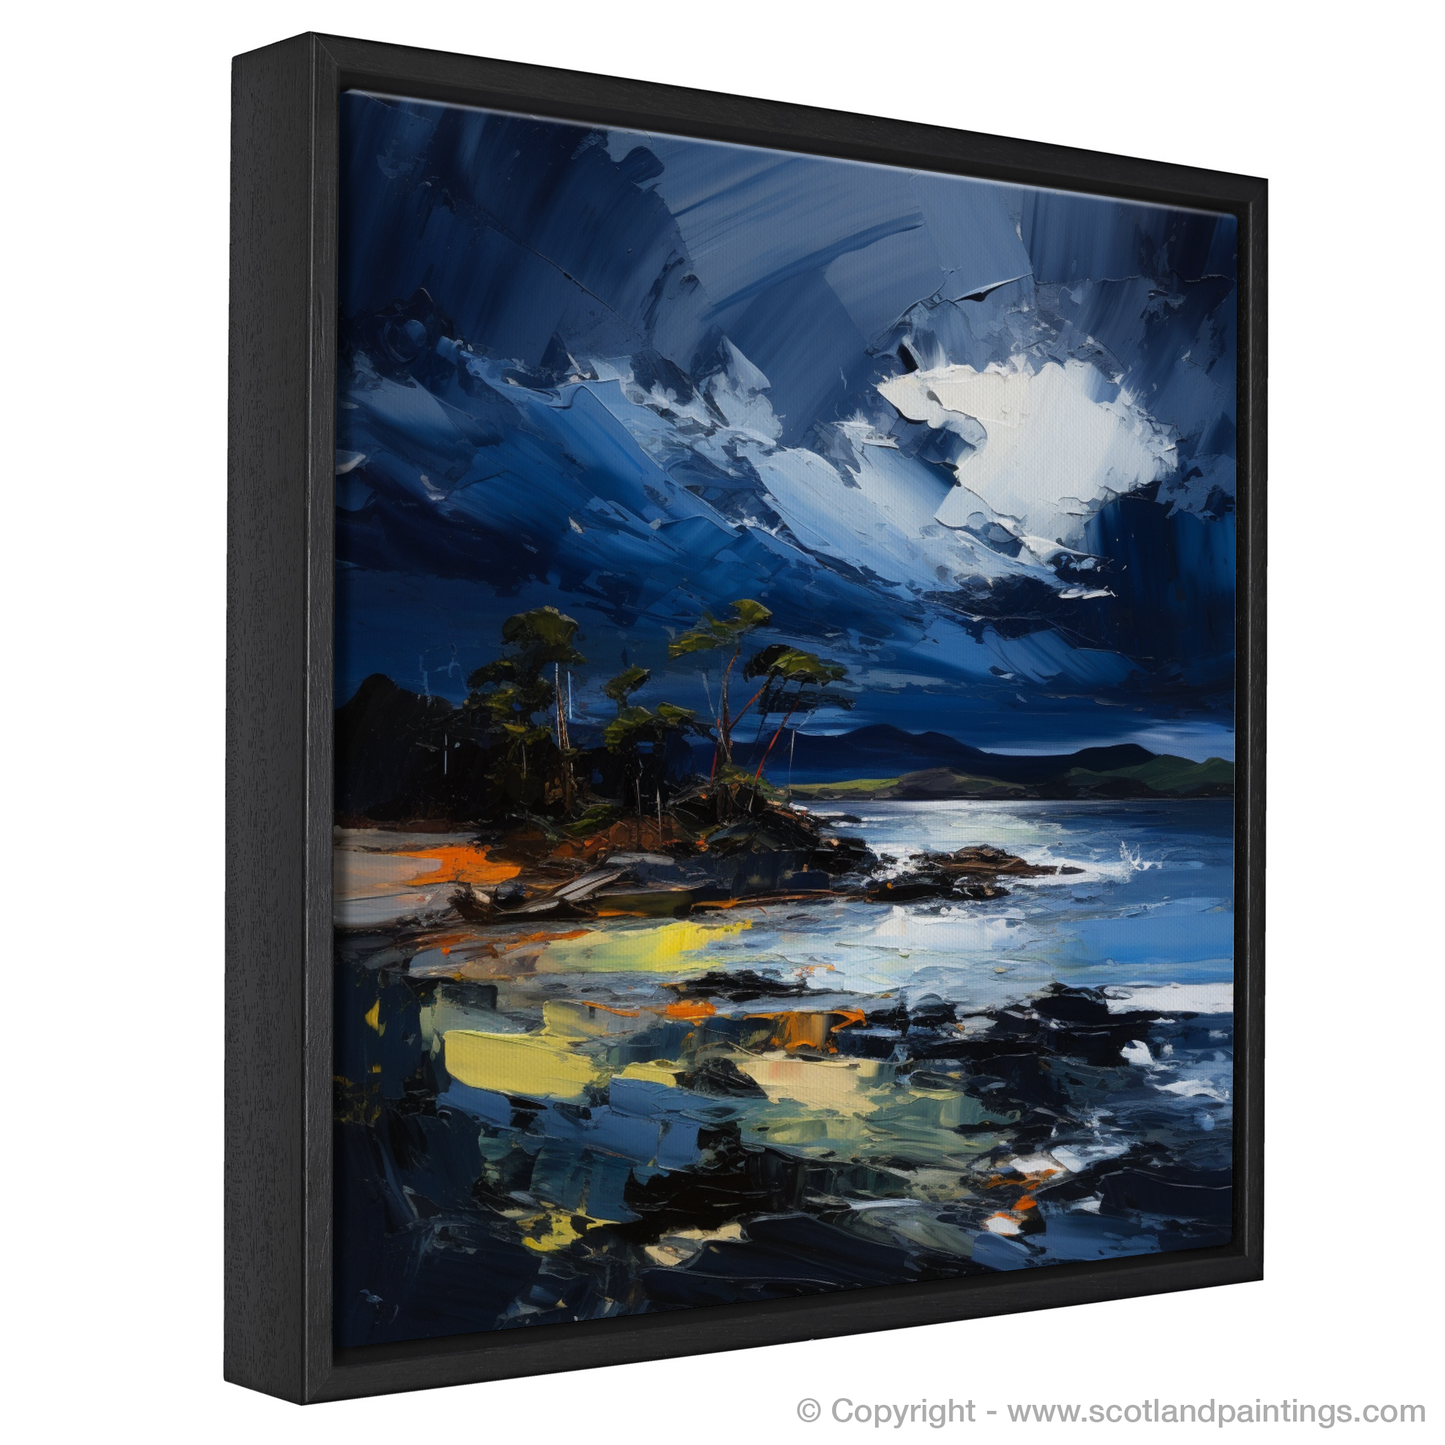 Painting and Art Print of Ardalanish Bay with a stormy sky entitled "Storm Over Ardalanish Bay: An Expressionist Ode to Scottish Coves".